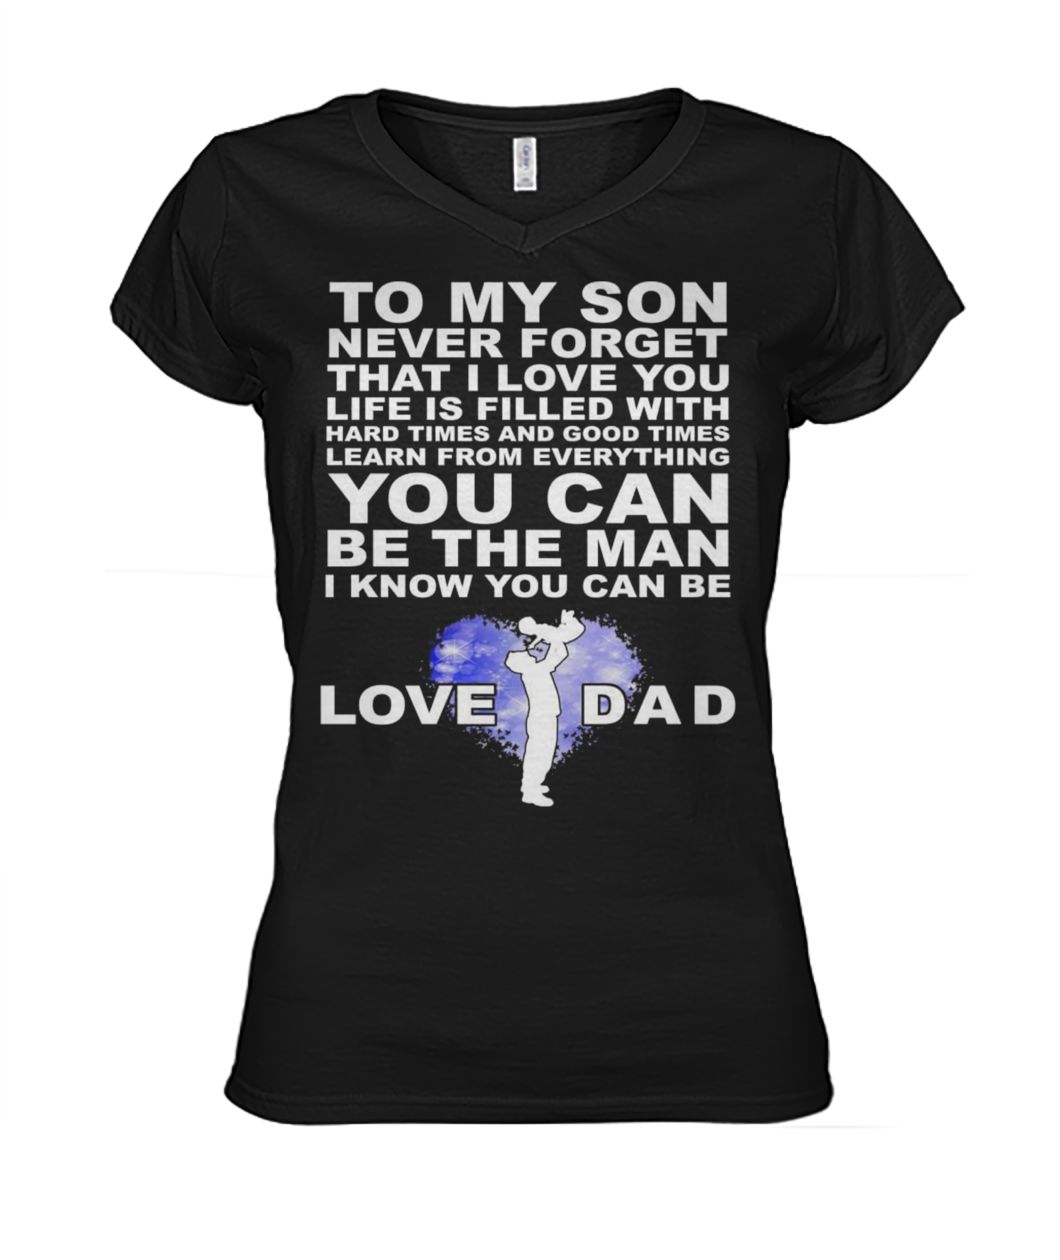 To my son never forget I love you love dad women's v-neck